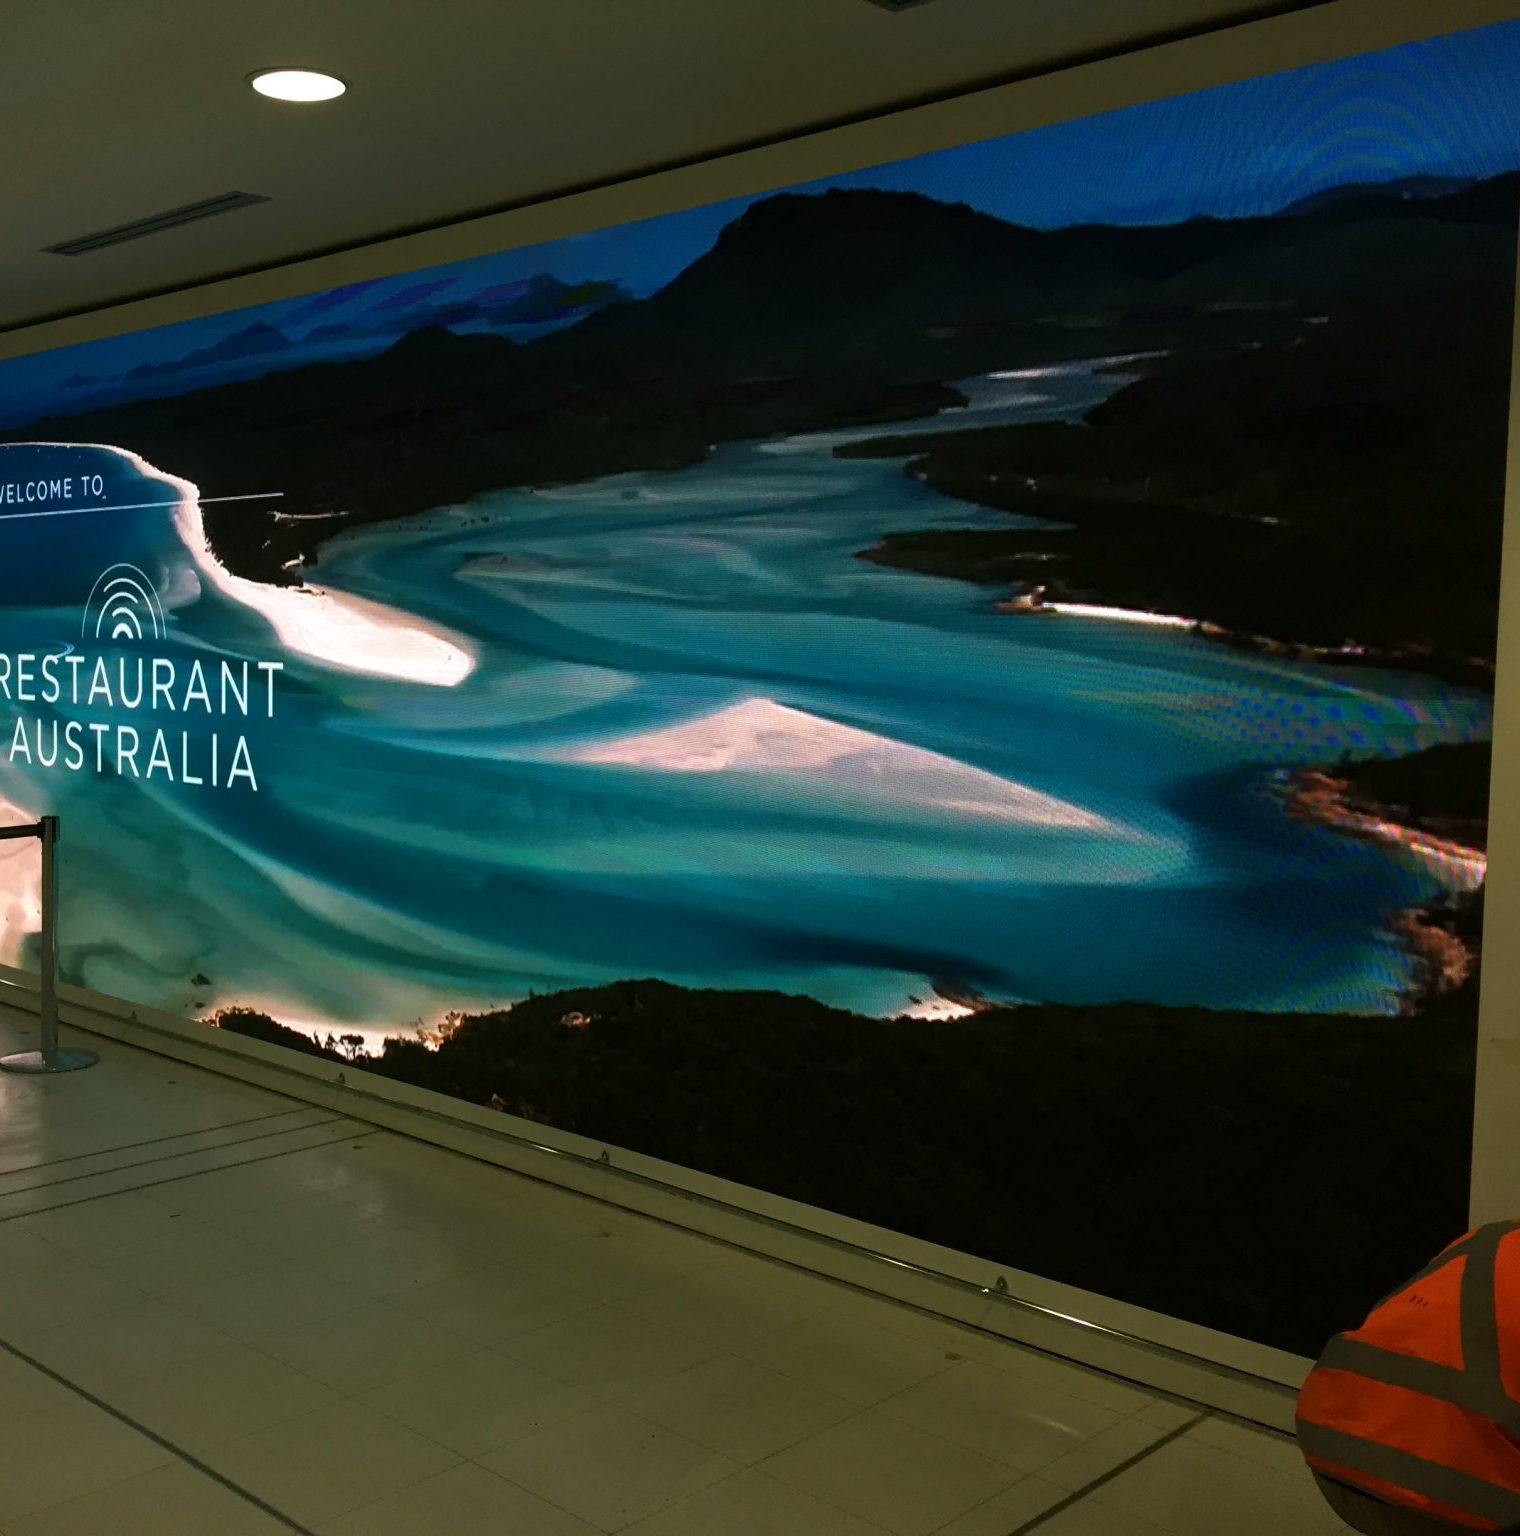 Image shows a large digital wall screen inside an airport